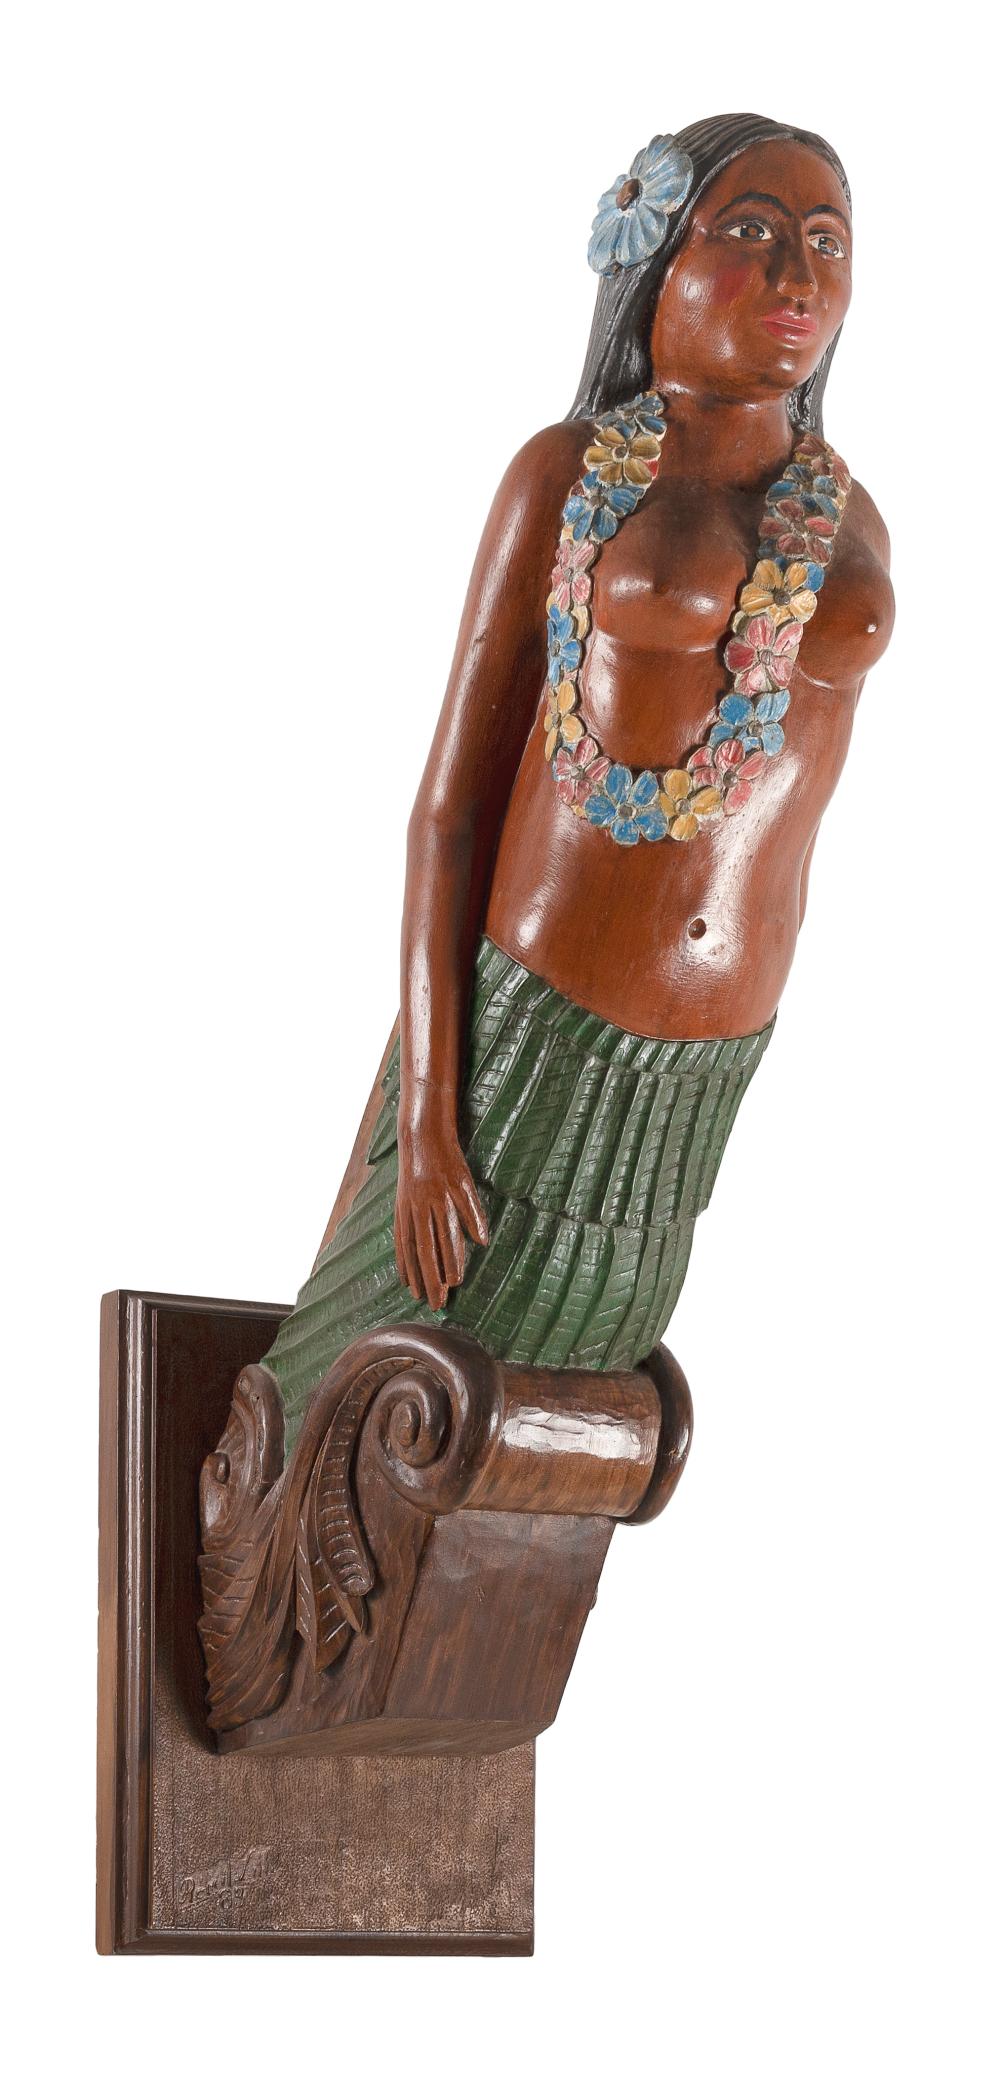 REPRODUCTION CARVING OF A NATIVE WOMAN